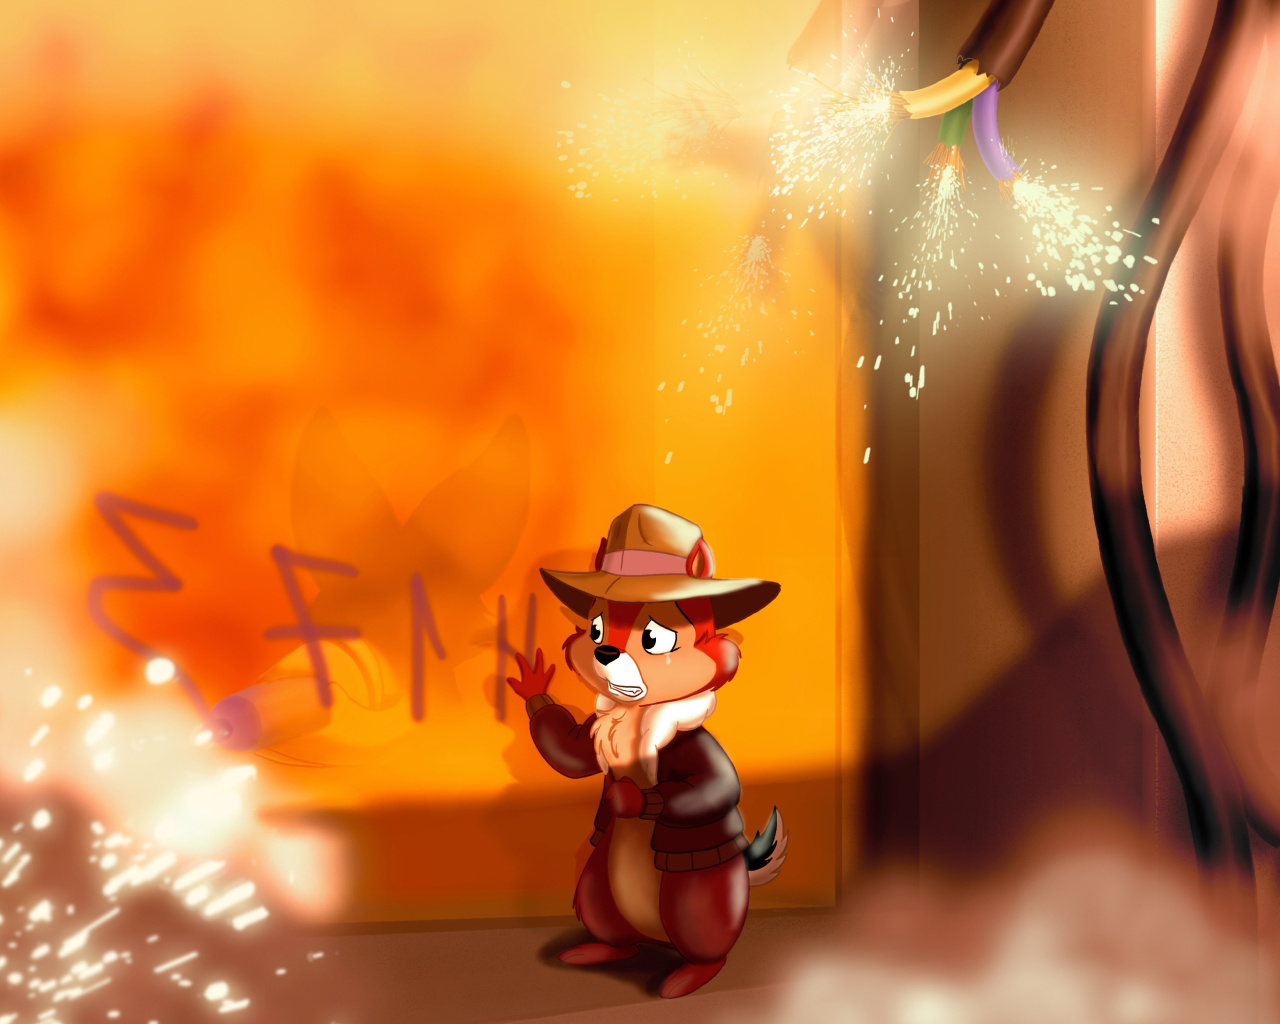 Chip and Dale Rescue Rangers 2 wallpaper 1280x1024